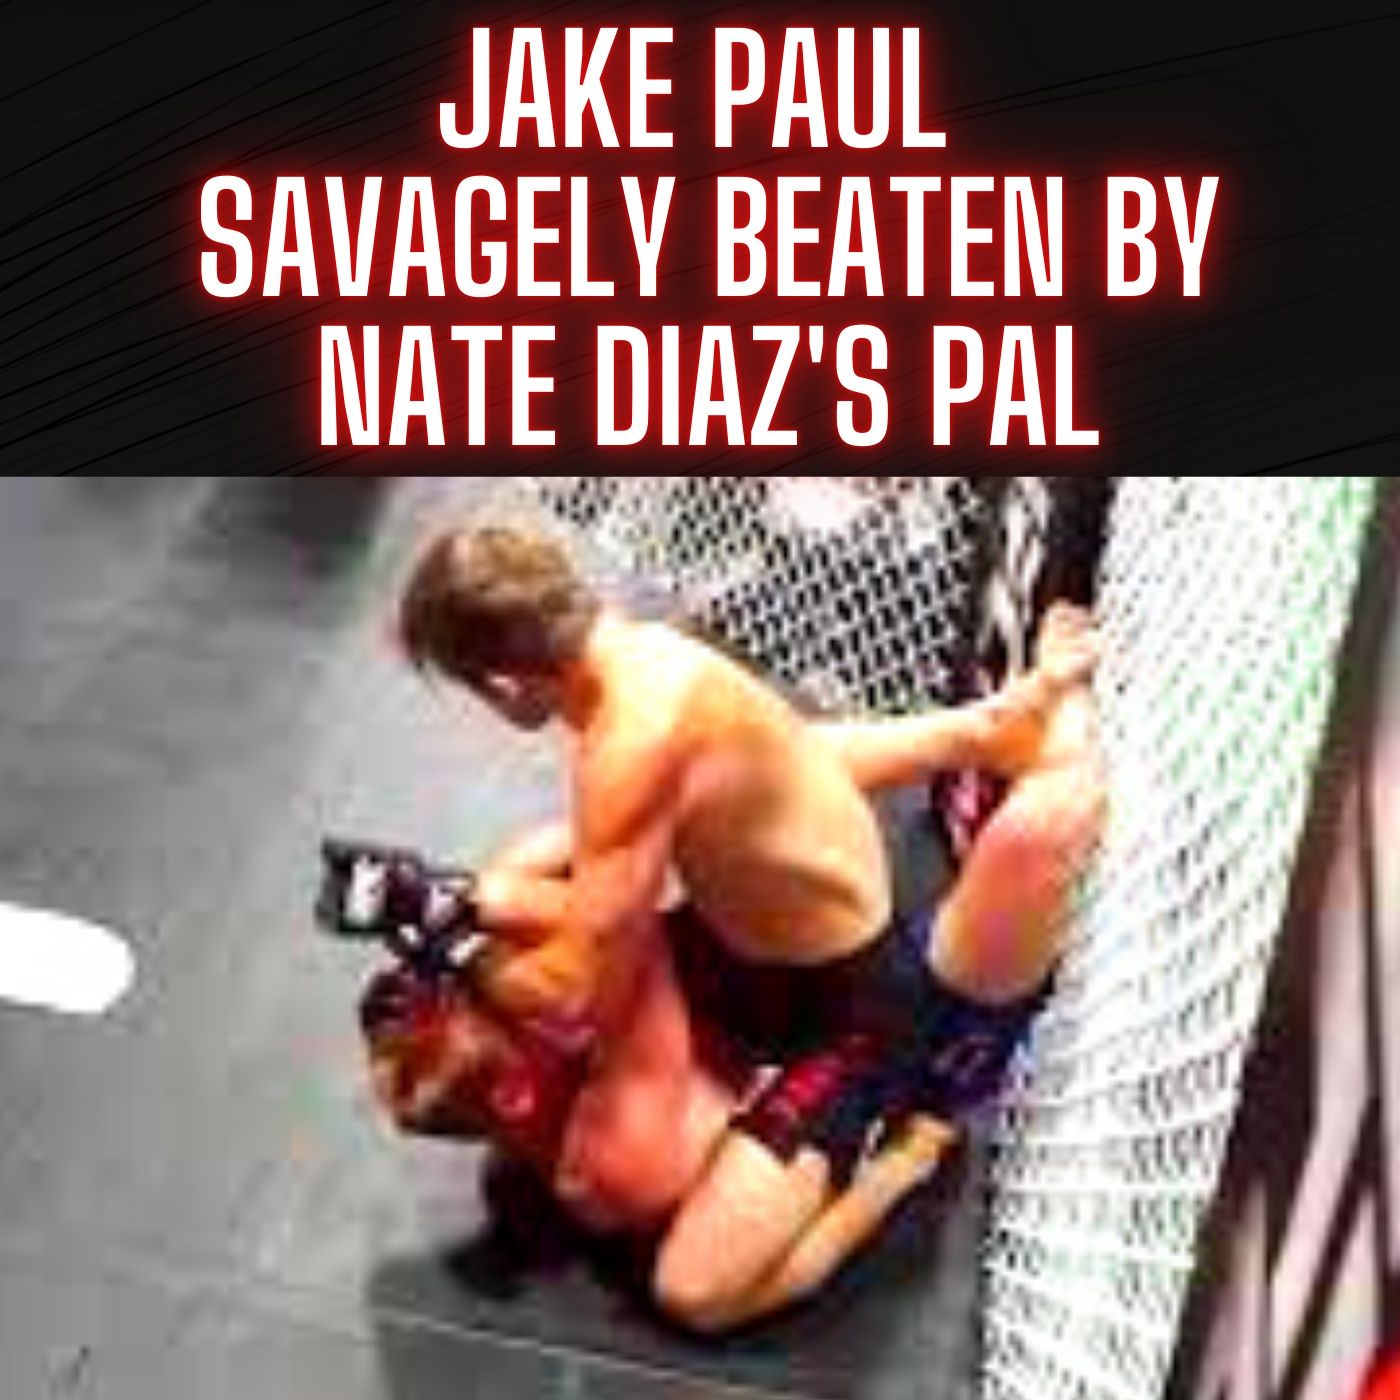 Jake Paul savagely beaten by Nate Diaz's pal as footage of sparring session comes to light